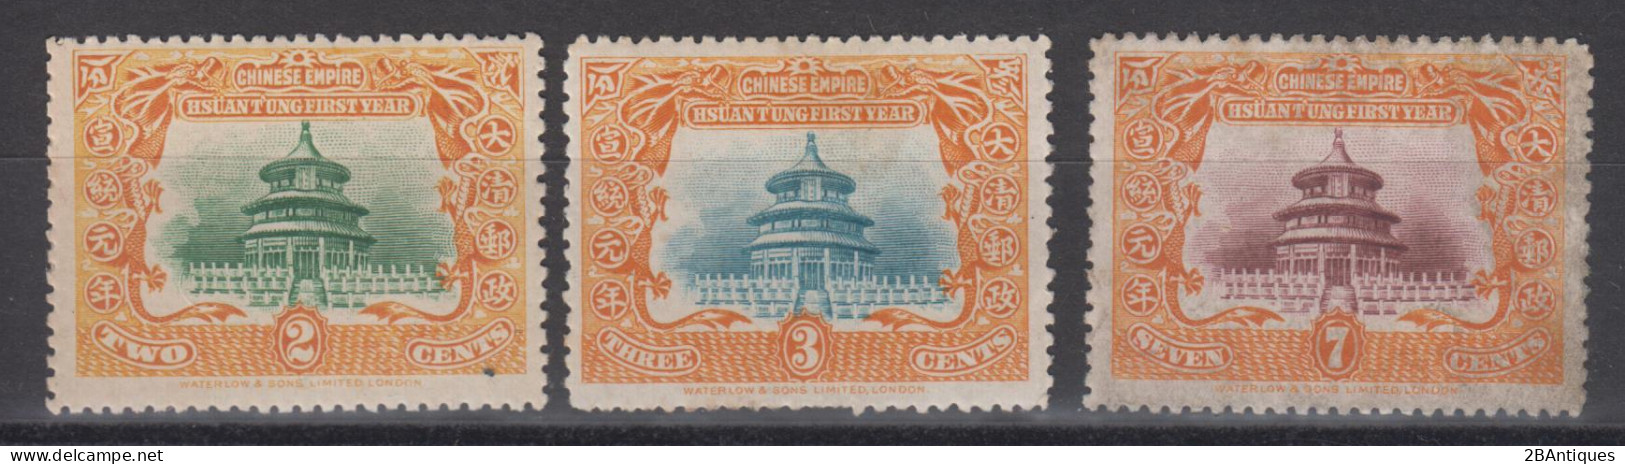 IMPERIAL CHINA 1909 - The 1st Anniversary Of The Reign Of Hsuan T'ung MH* / No Gum - Neufs